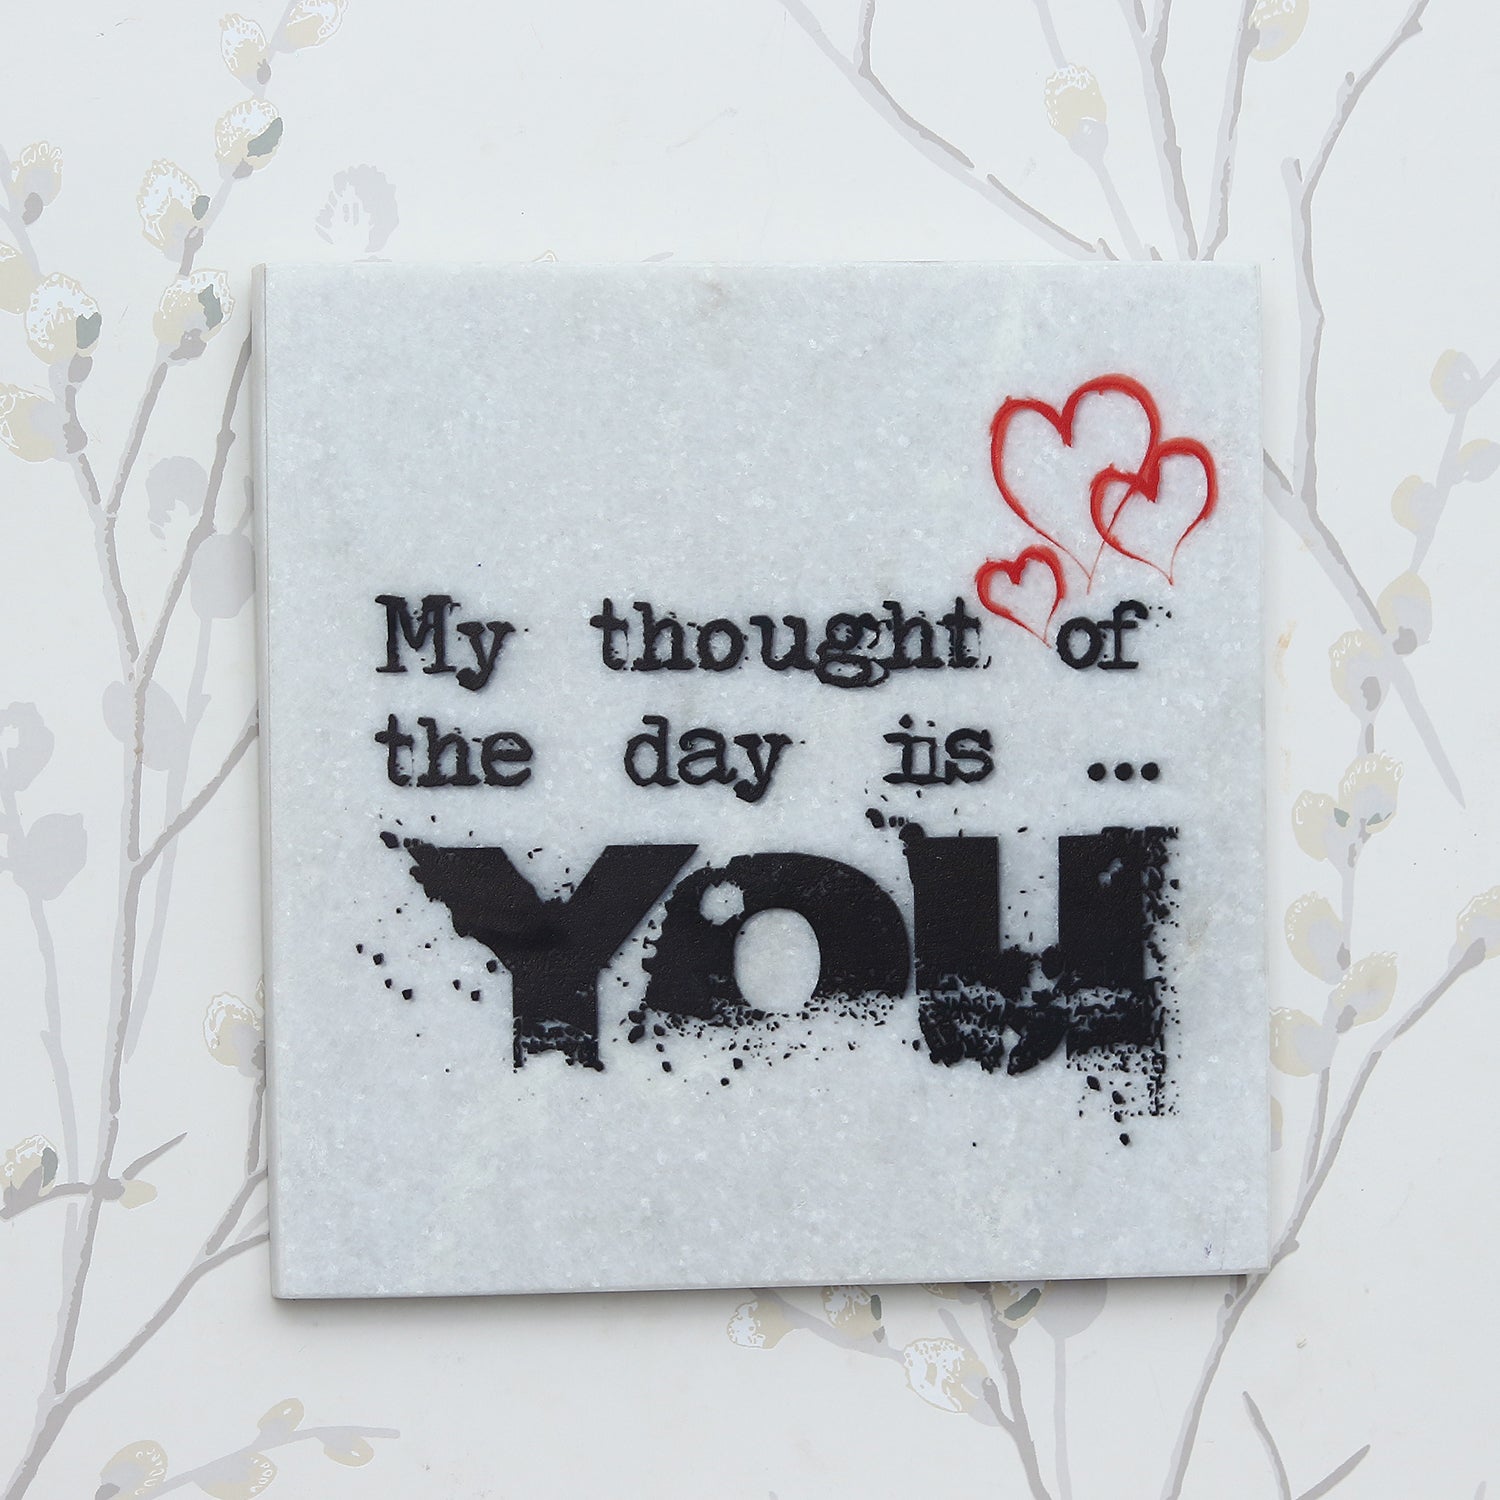 "My thought of the day is YOU" Quotation Painting On Marble Square Tile 6